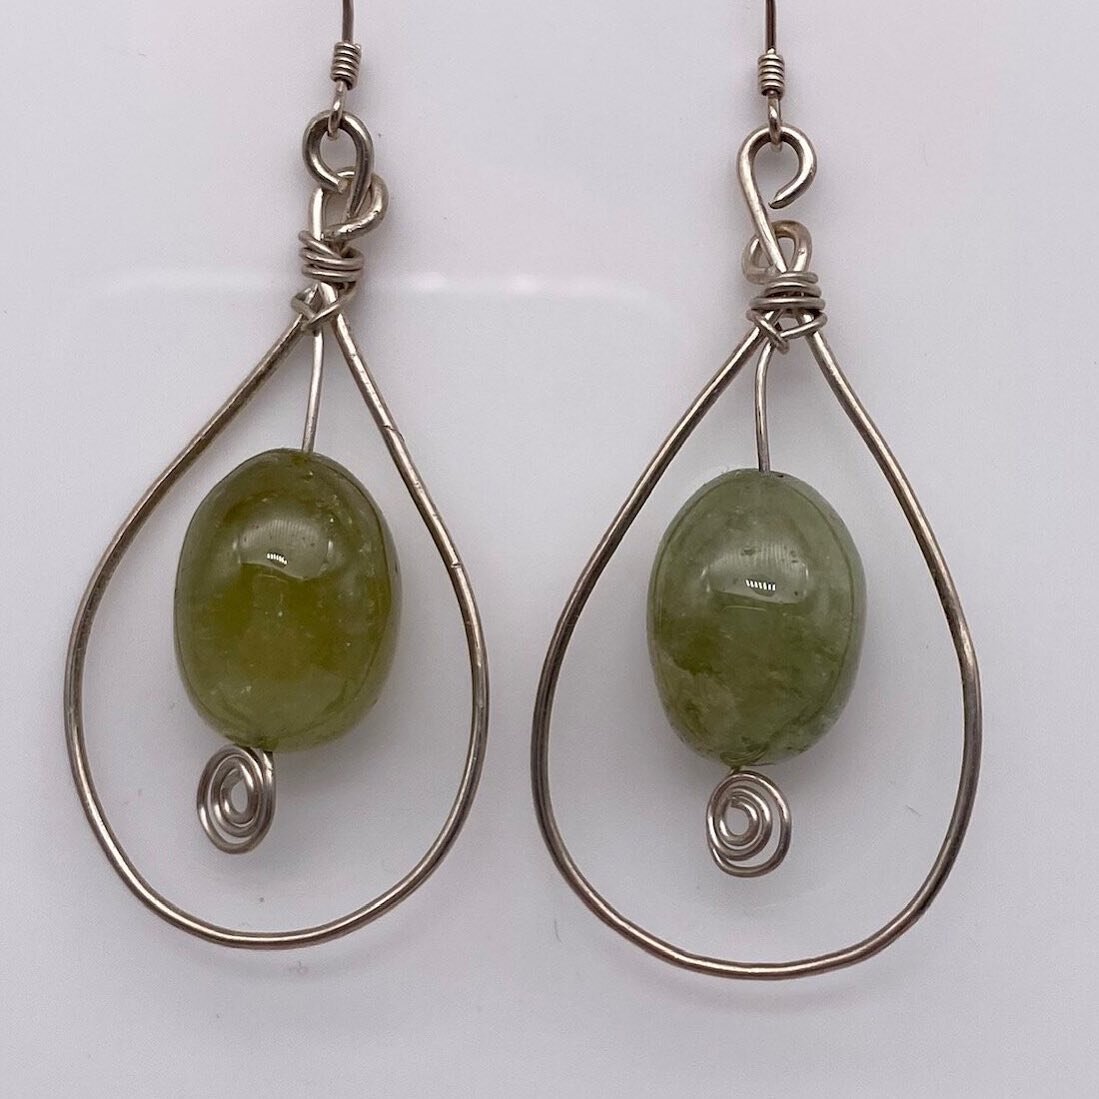 Reminiscent of Gooseberries who share the same colour and shape, green Garnets have long been used to promote spiritual growth as we manifest our goals.

Wire wrapped, these sterling silver and green Garnet earrings hang at 2.5&rdquo;.

Made exclusiv